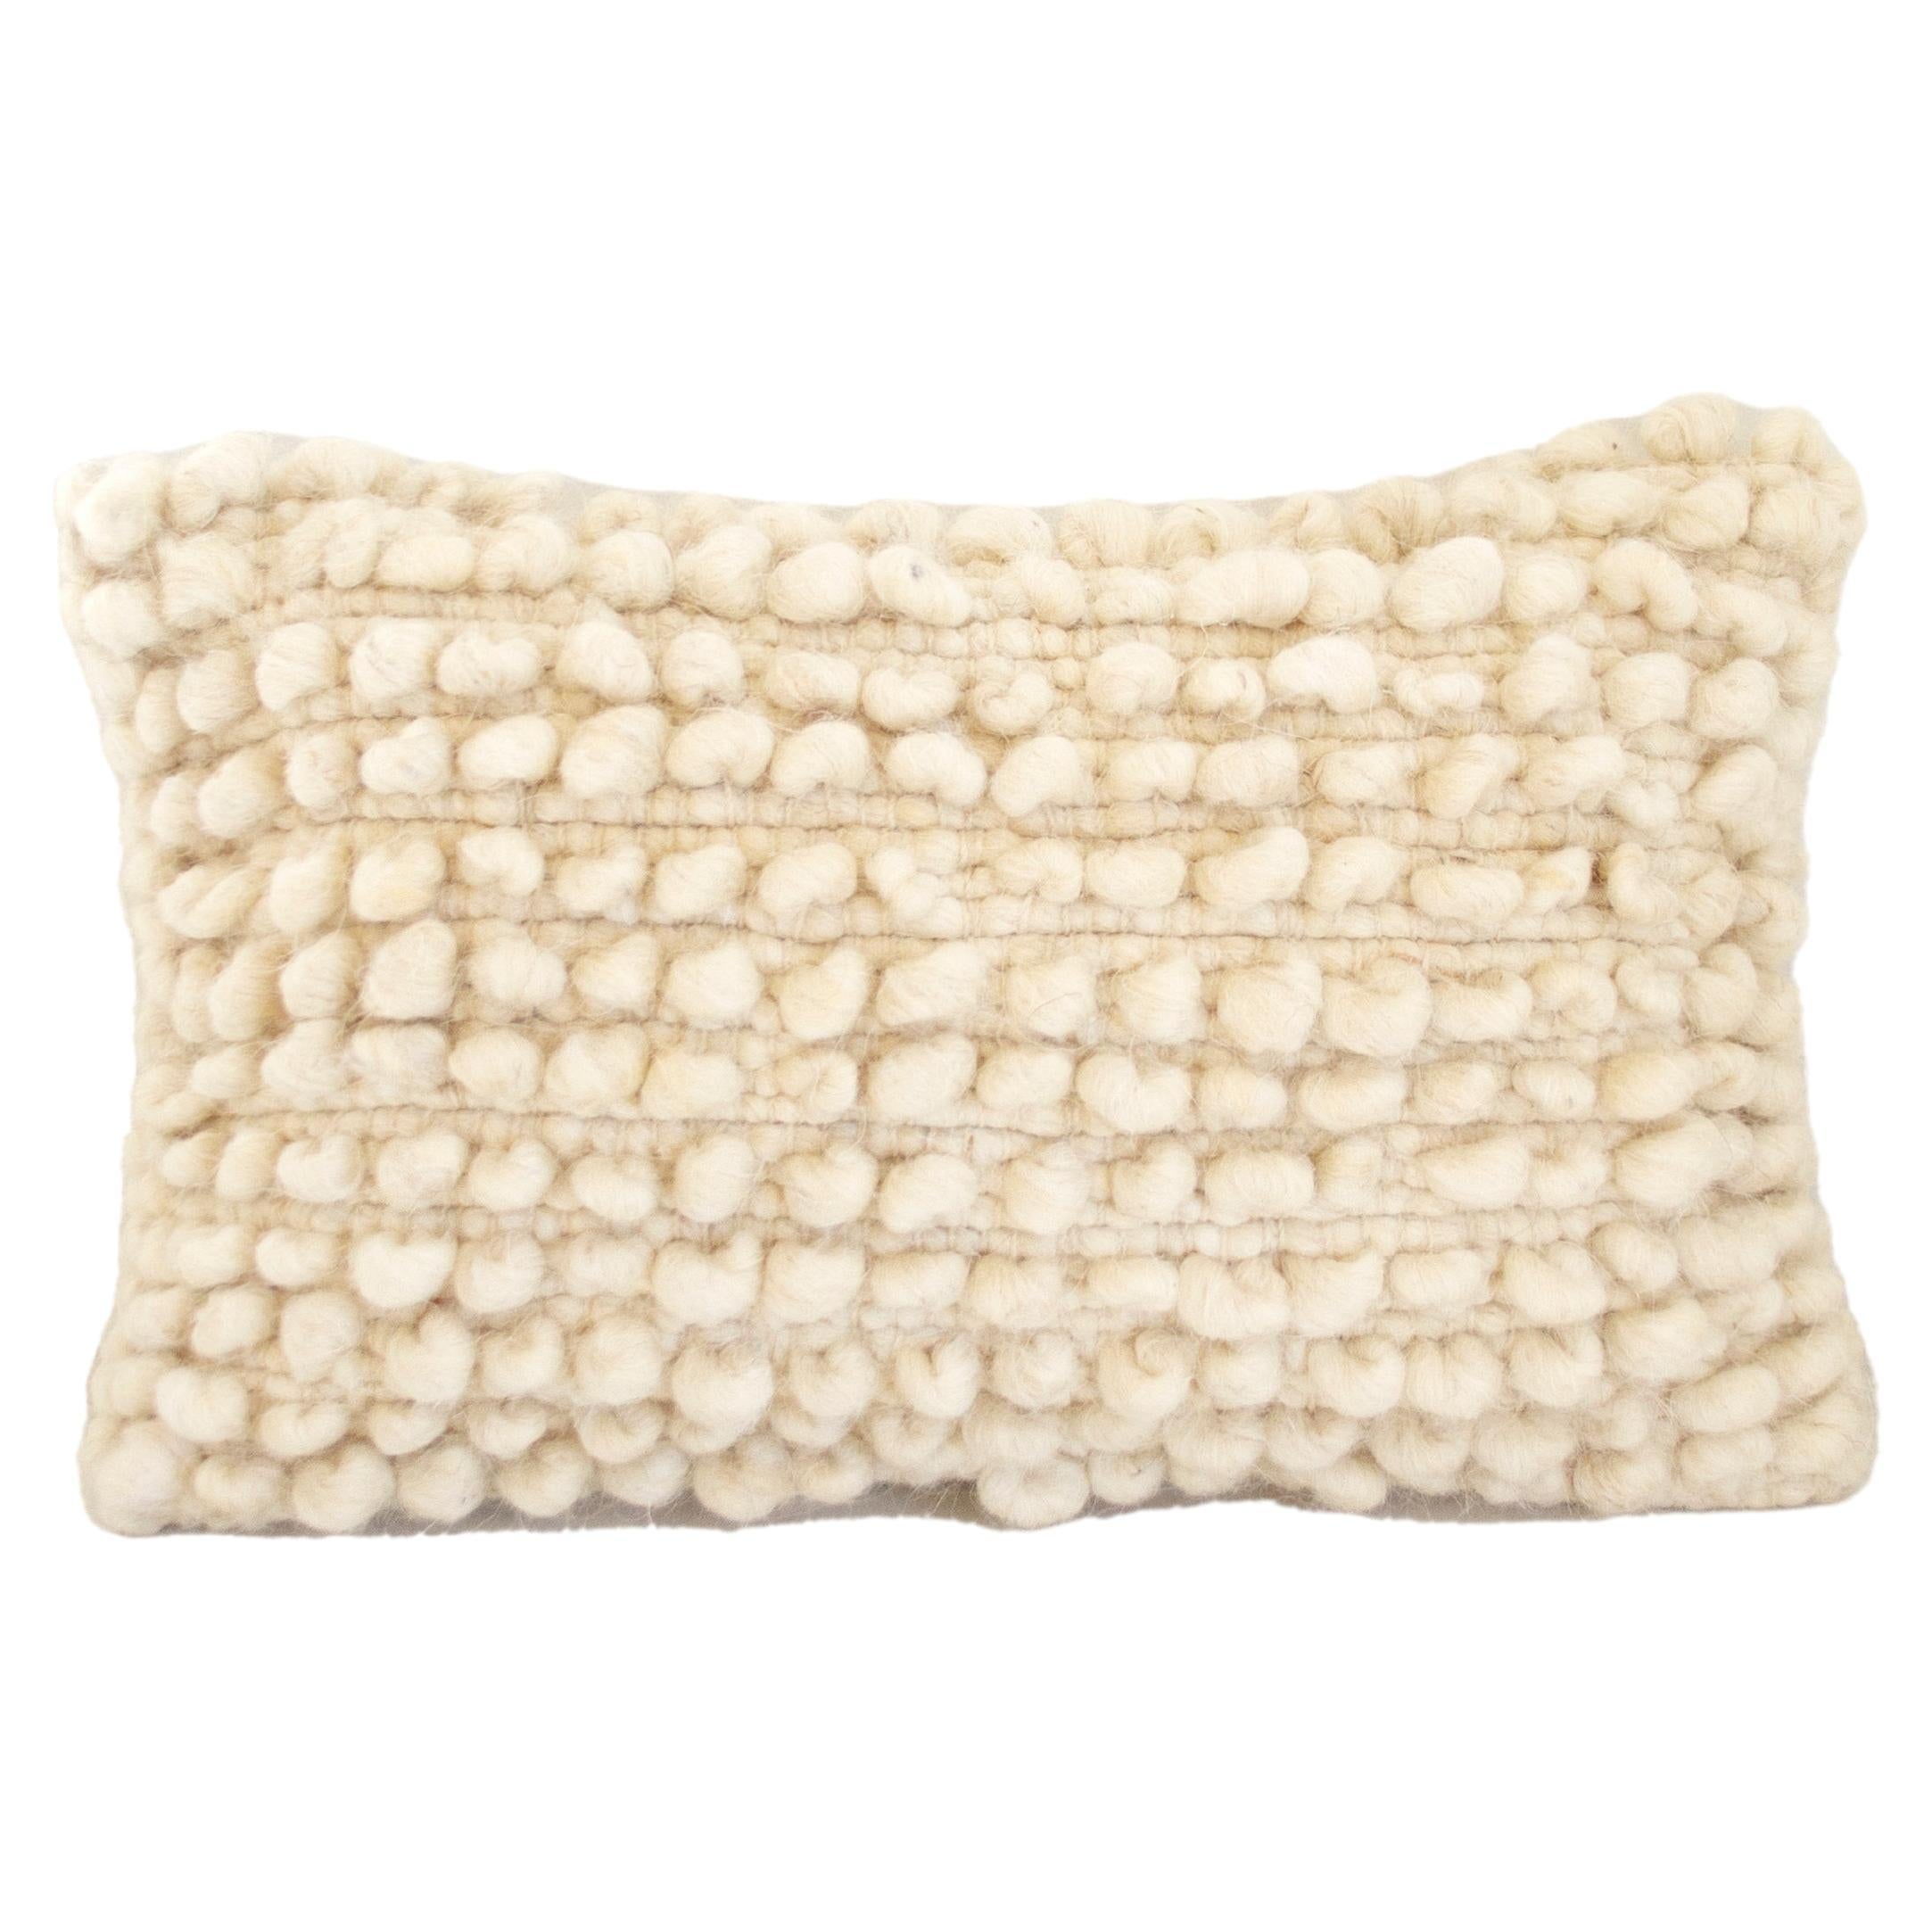 Fatima Bobble Throw Pillow in Cream White made from 100% sheep wool - 20" x 12" For Sale